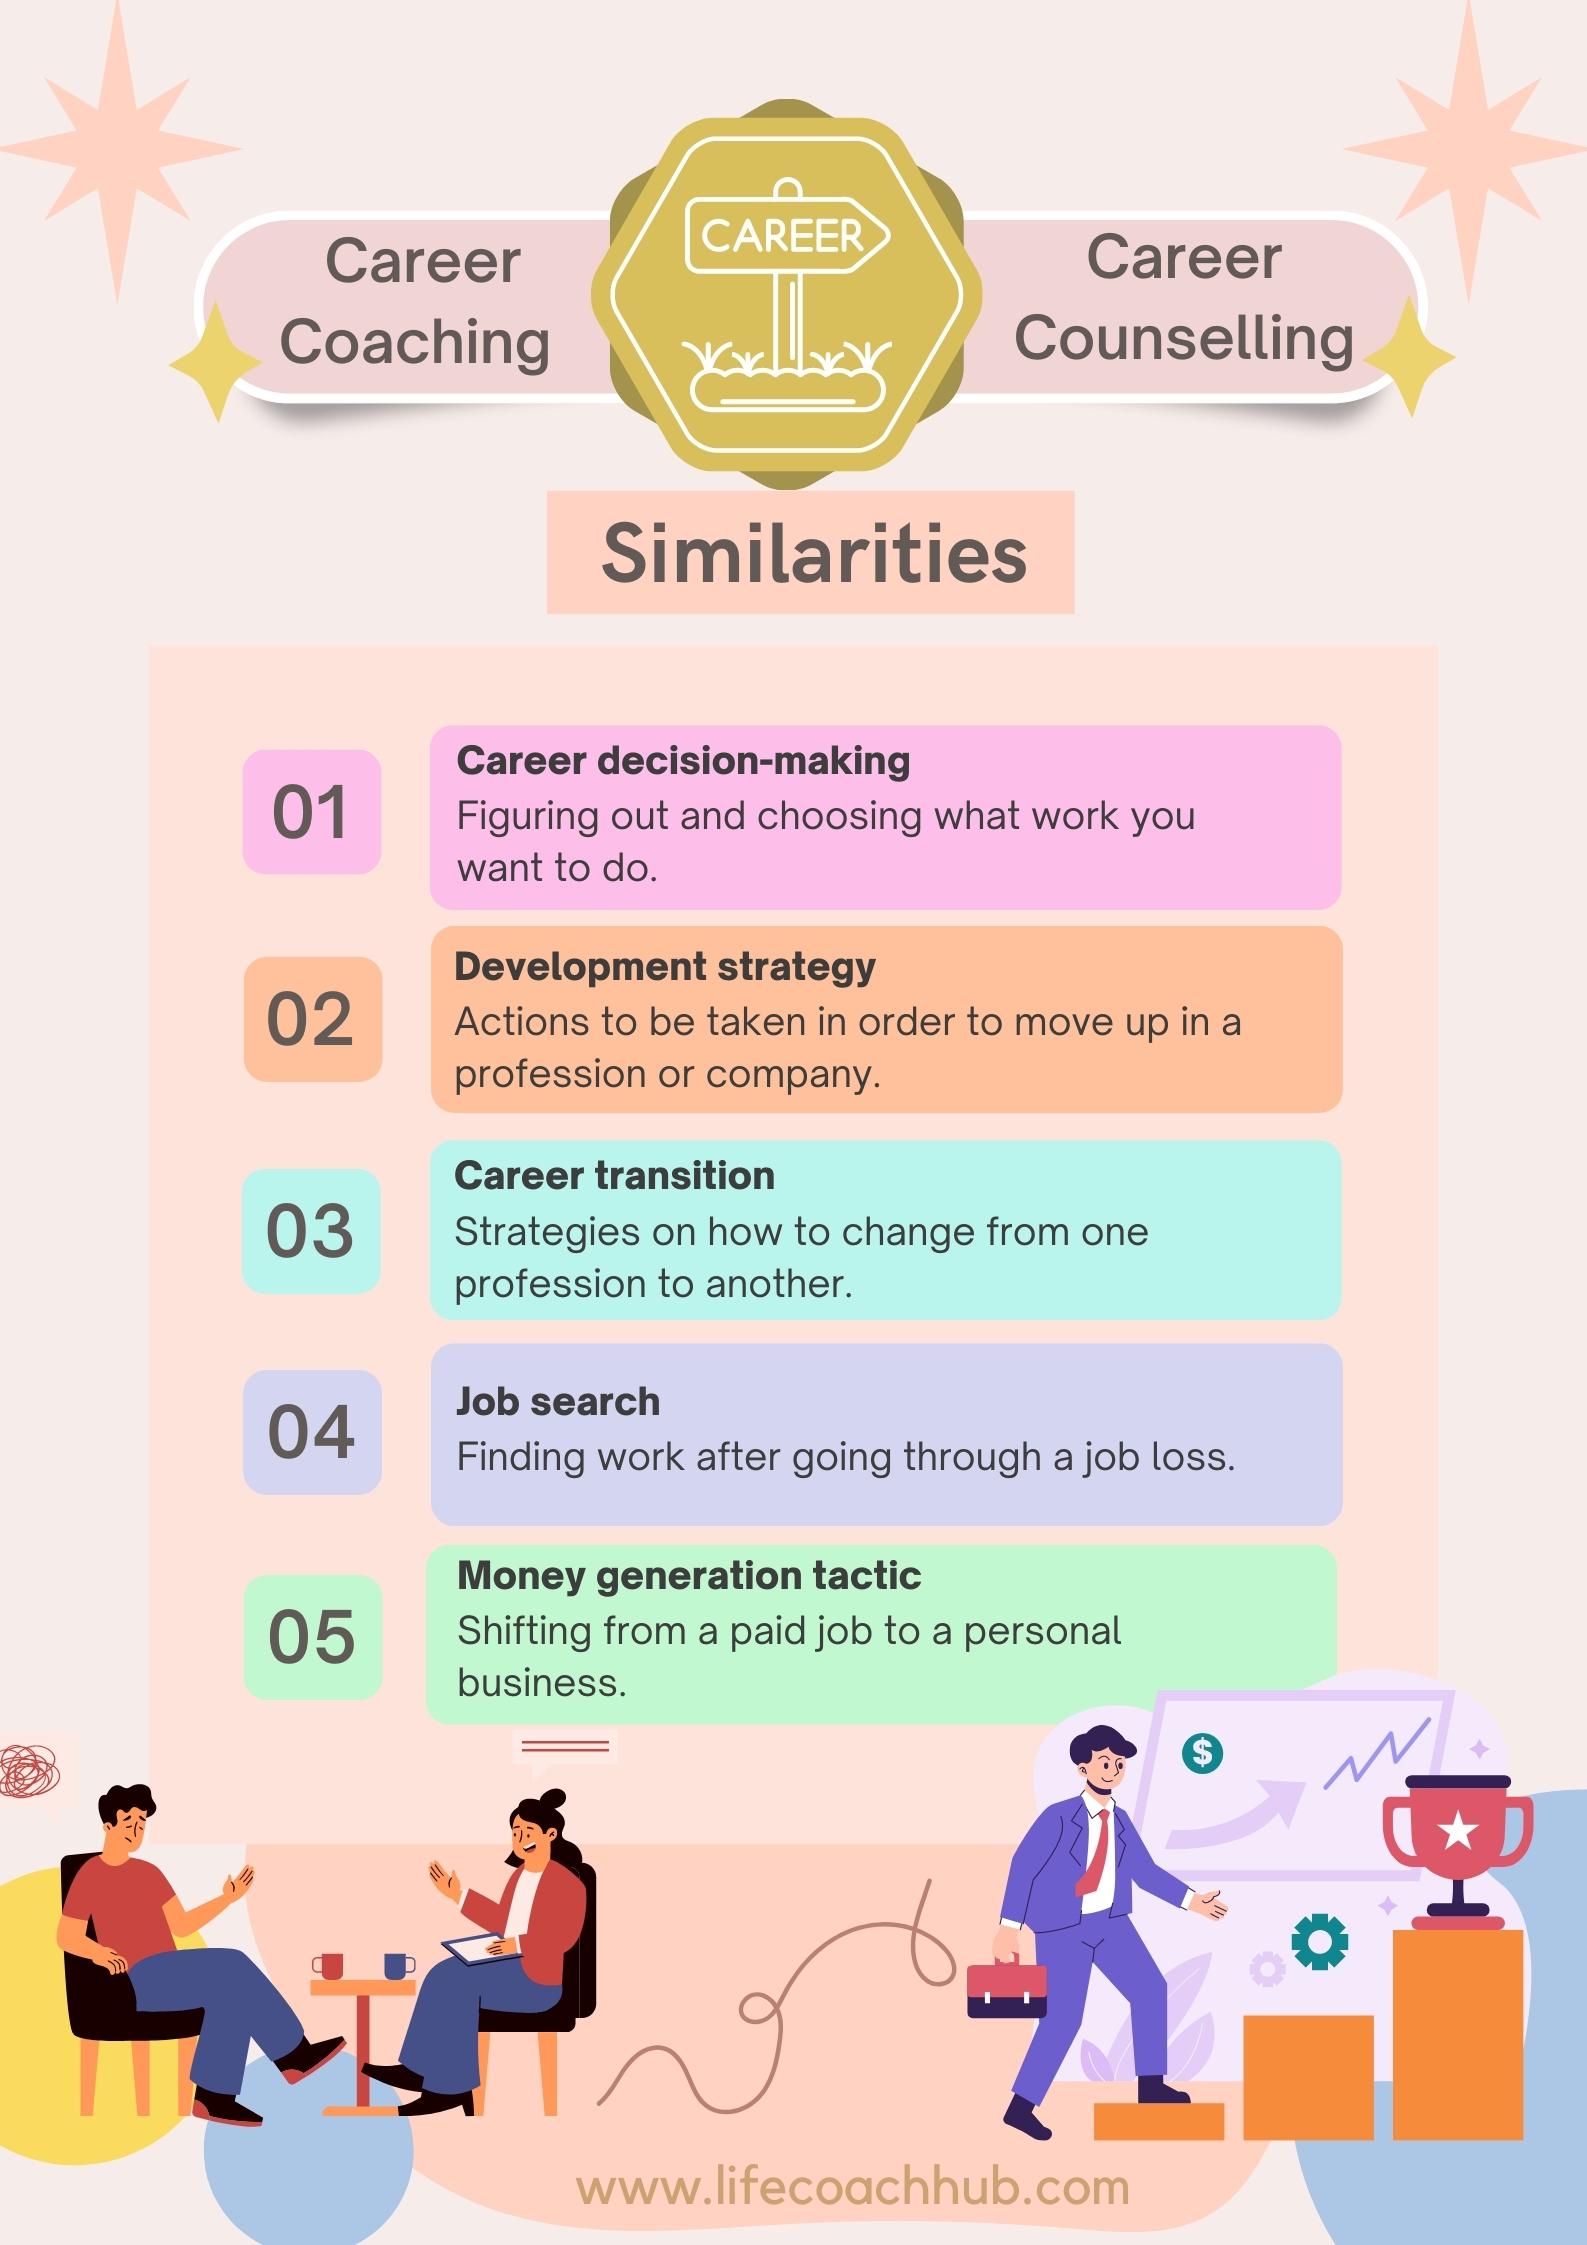 Similarities of career coaching and career counselling